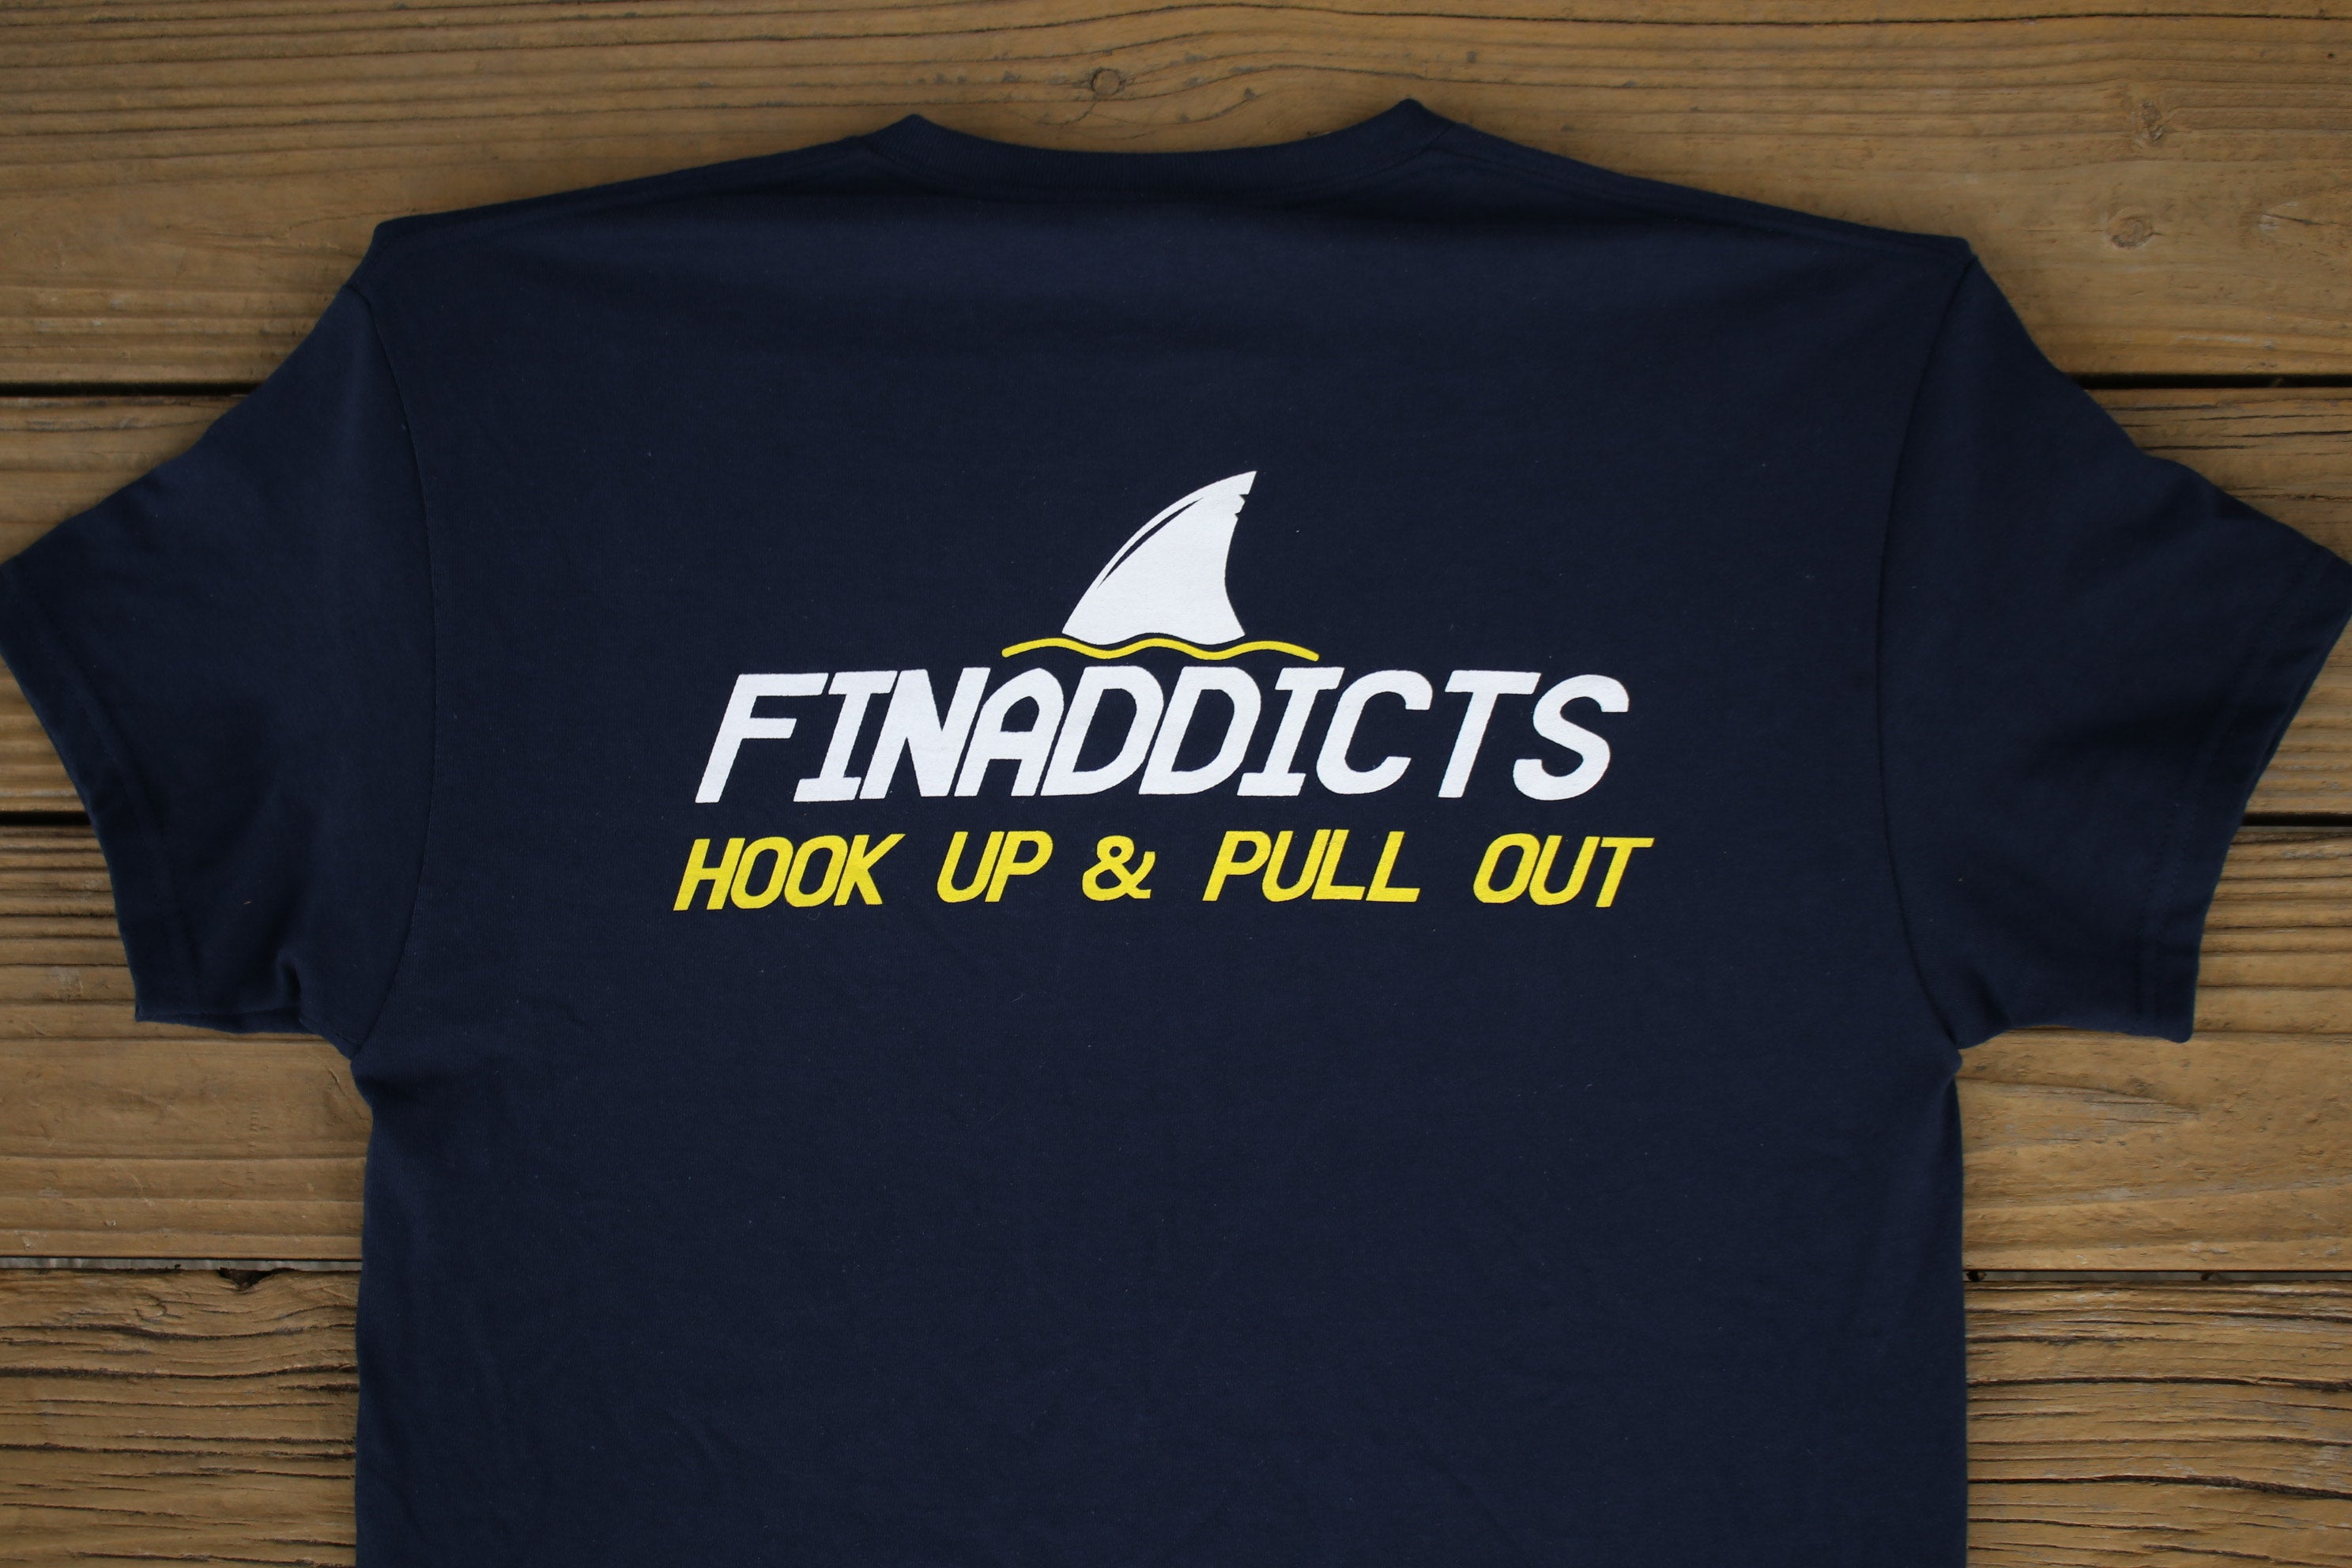 Finaddicts Hook Up & Pull Out Shirt 3XL